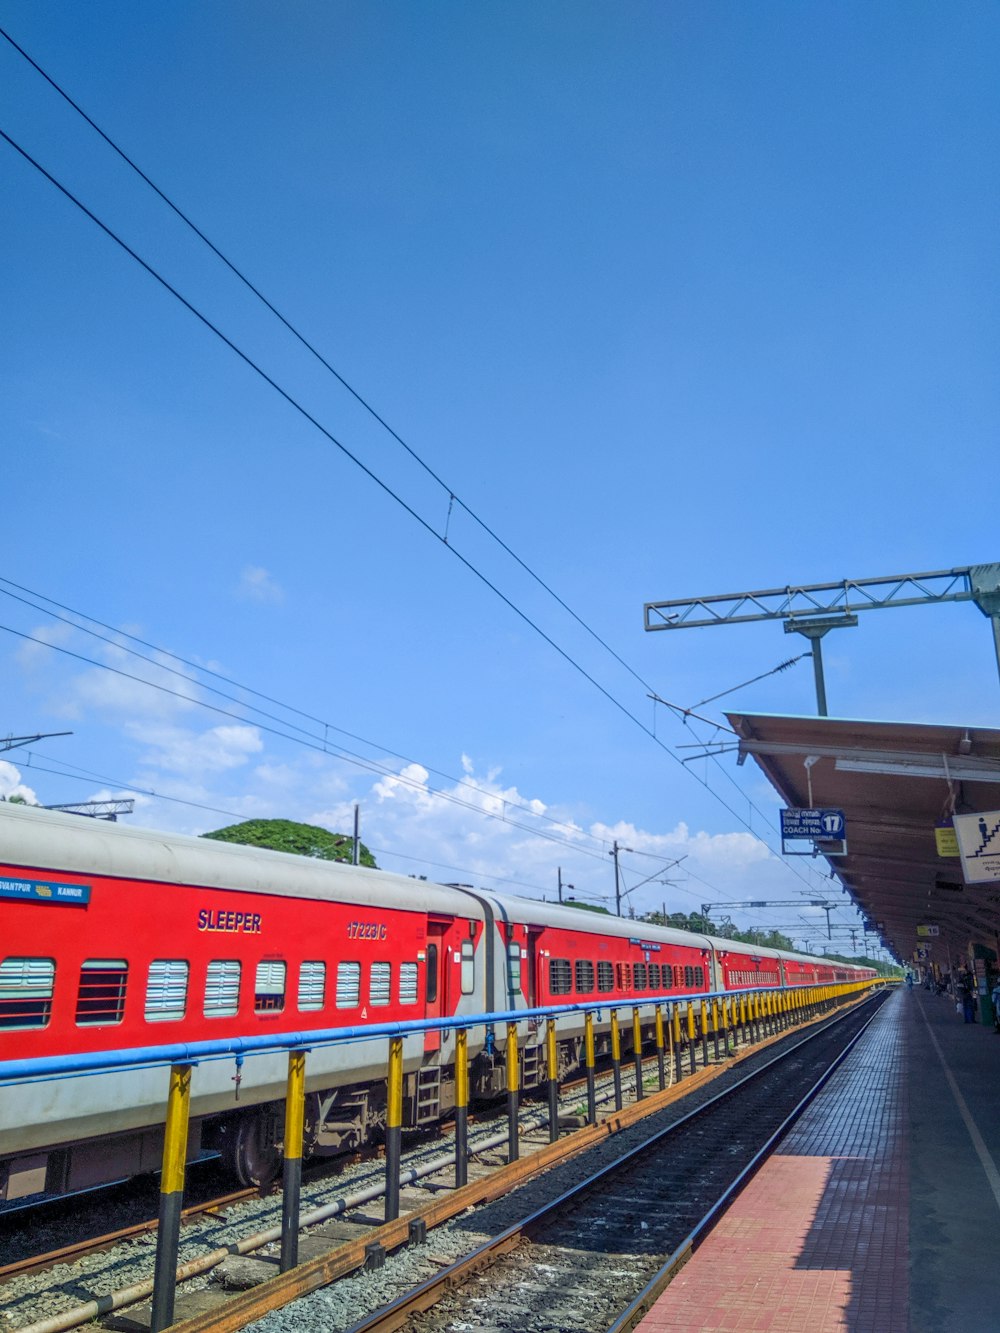 red and white train under blue sky during daytime